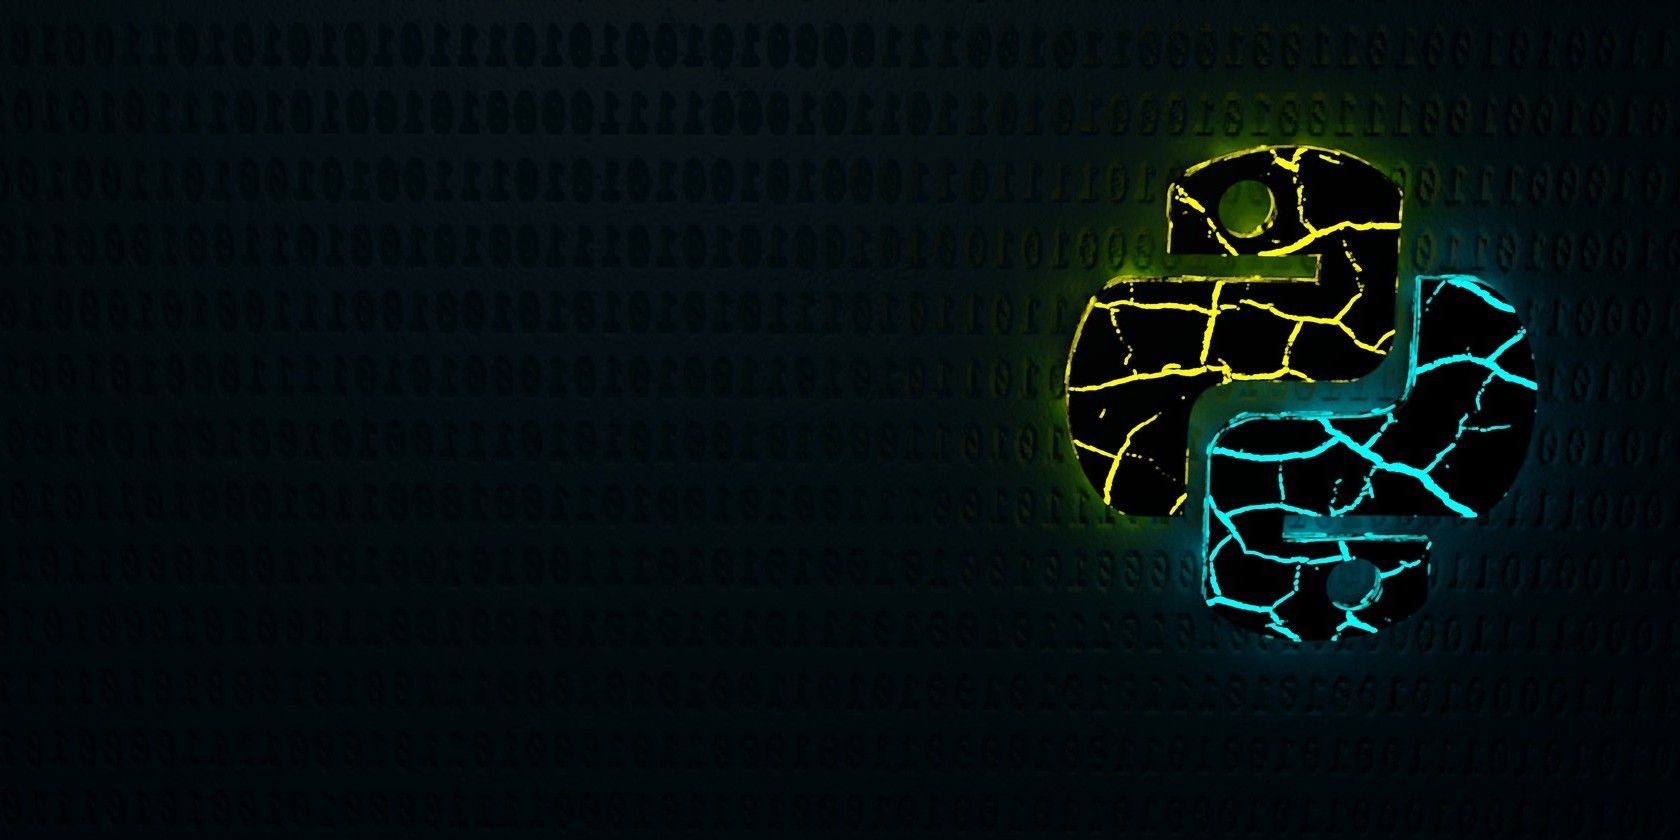 An image of the Python logo surrounded by binary numbers on a dark background